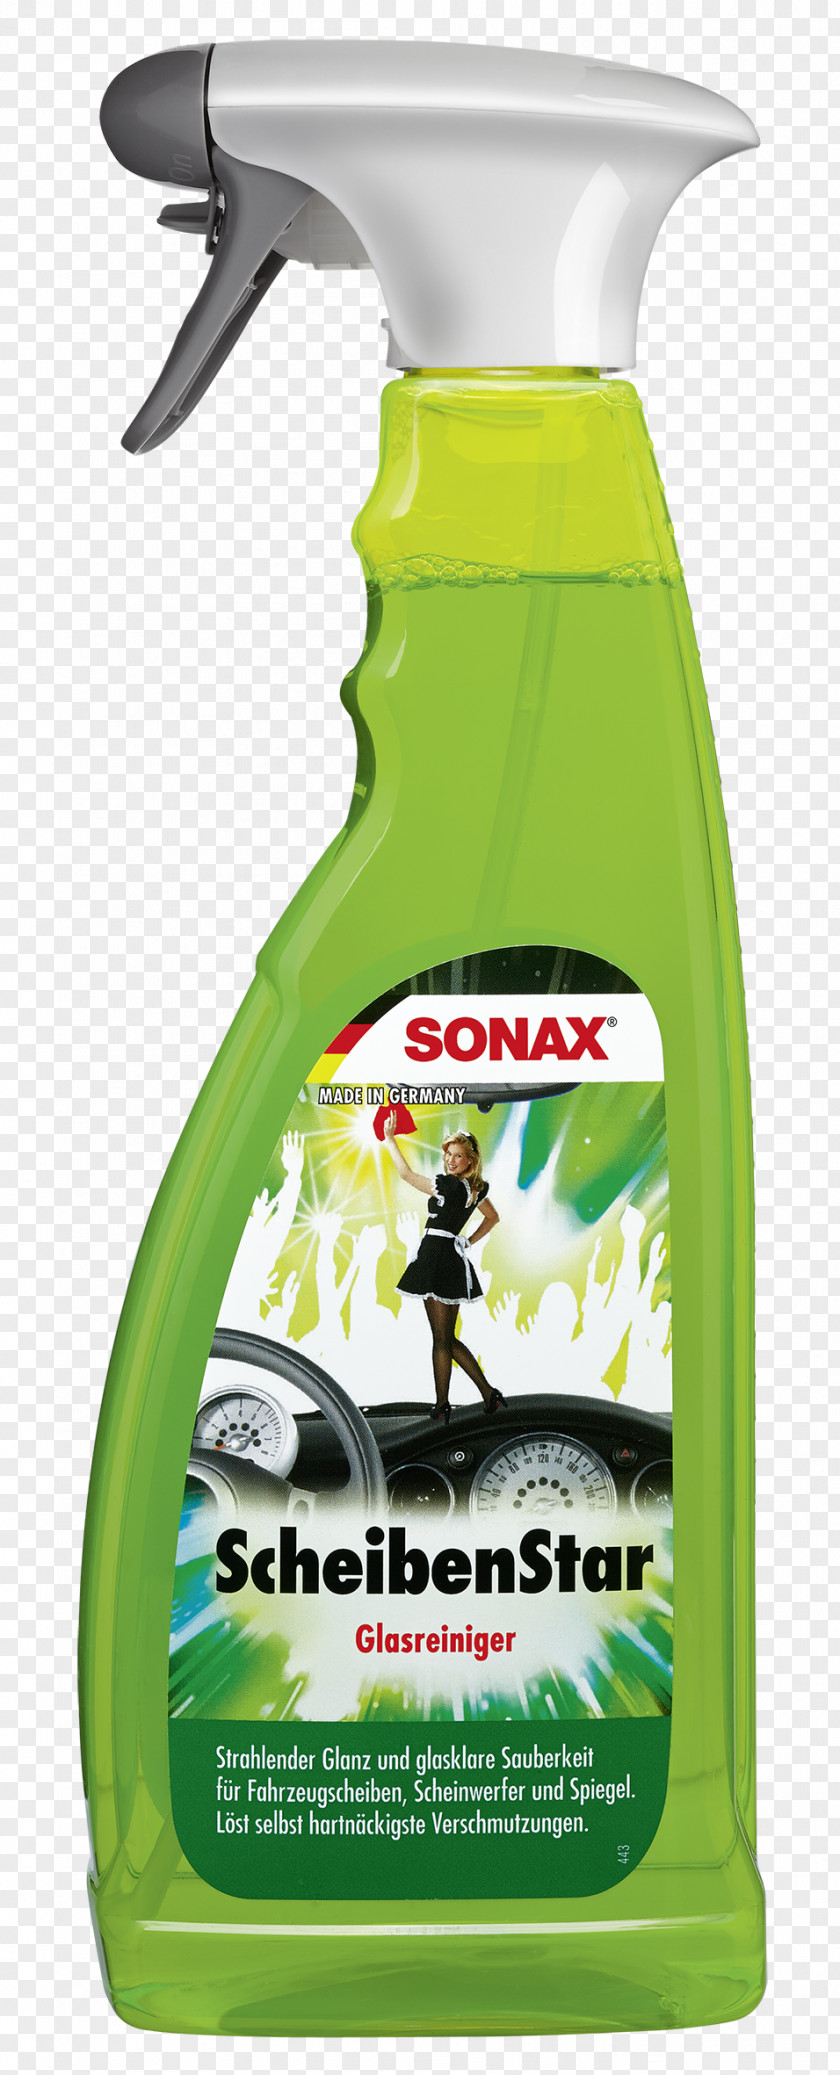 Car Sonax Cleaning Polishing PNG